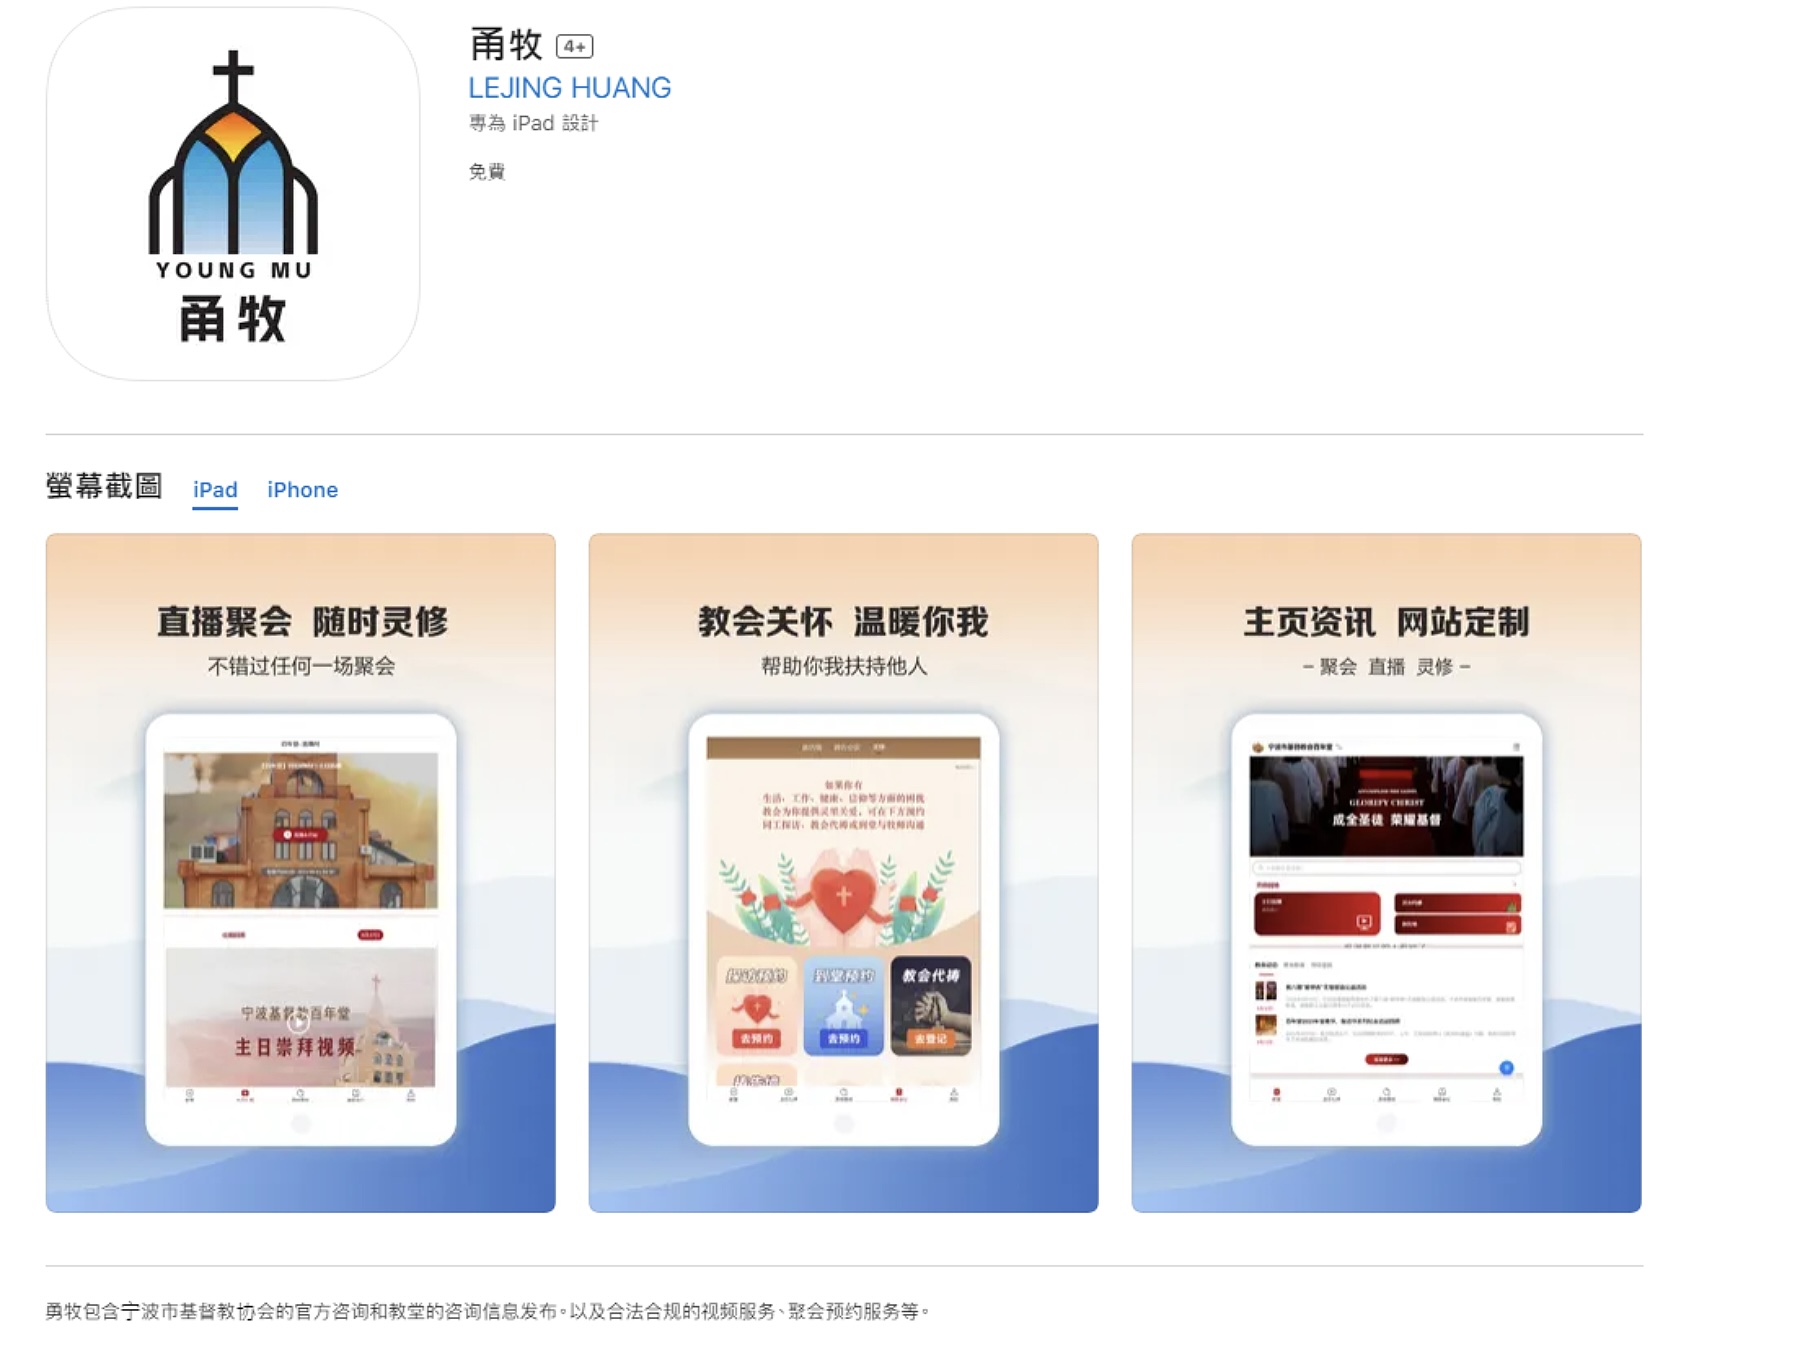 A screenshot of the application "Ningbo Church Pastors" on the App Store 